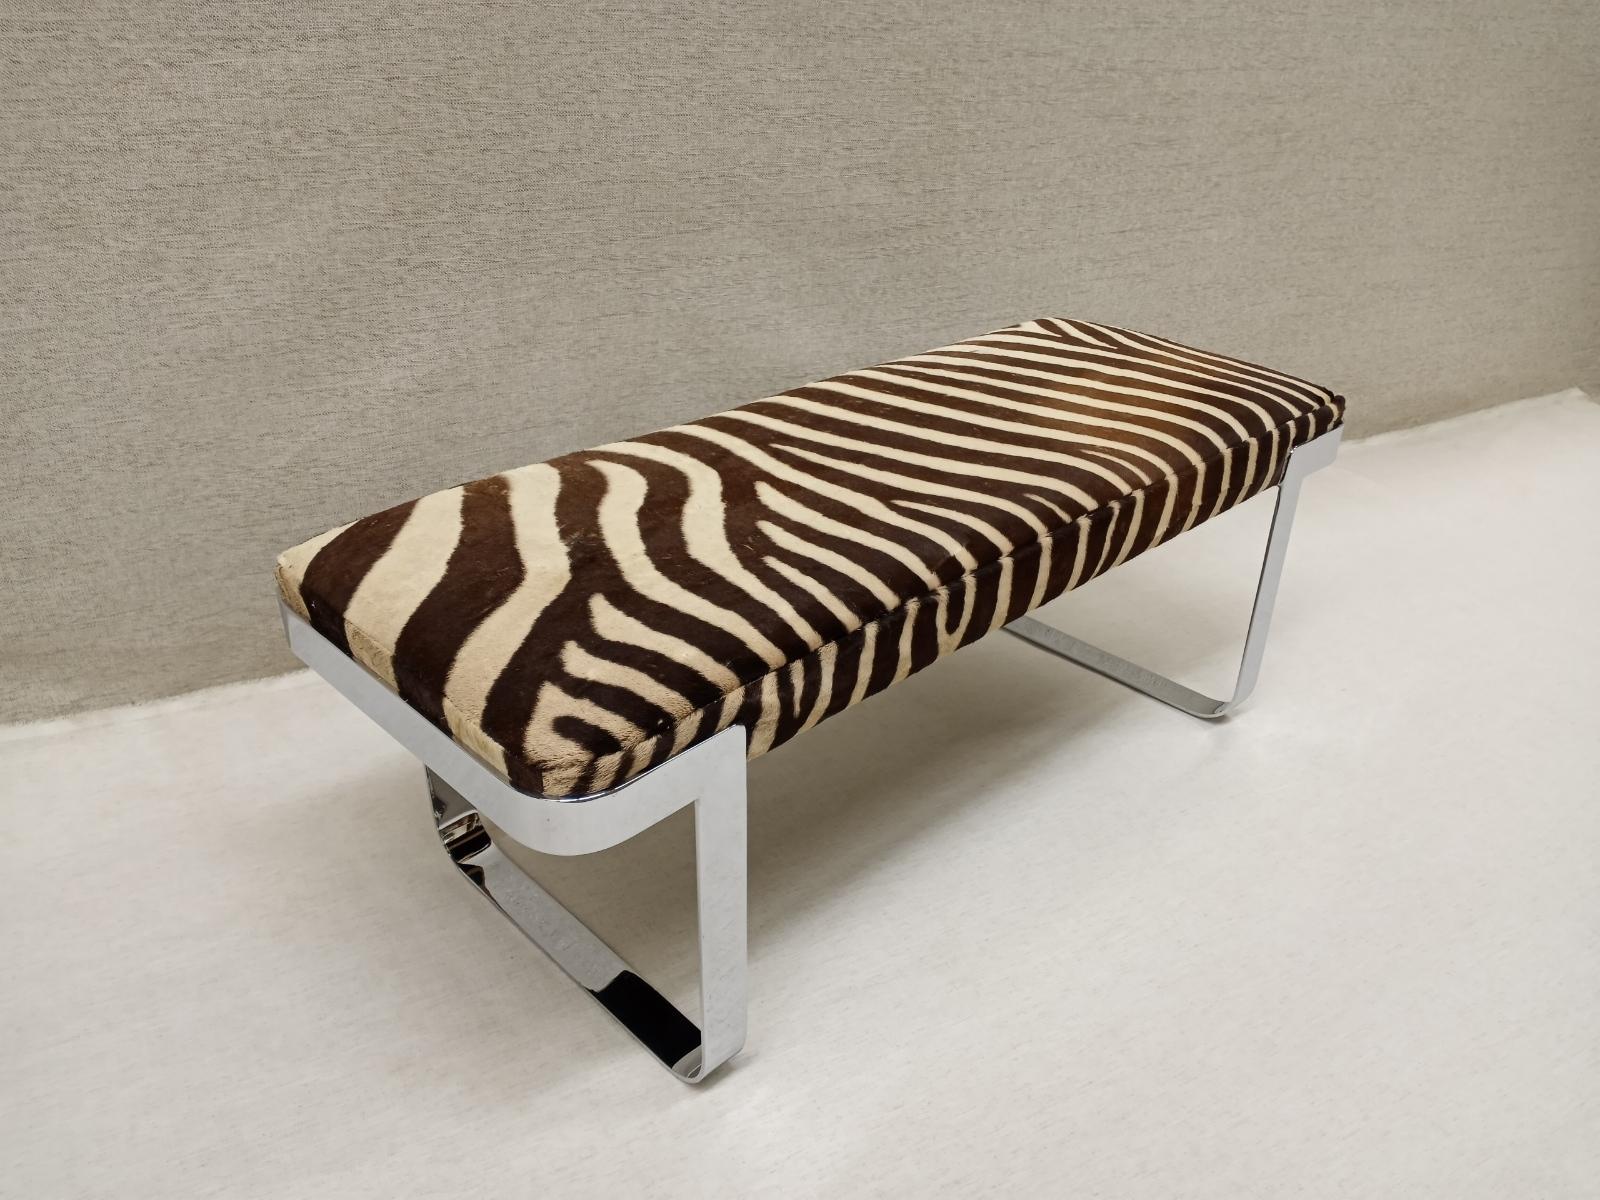 American Mid-Century Modern Chrome Bench by Tri Mark Newly Upholstered in Zebra Hide